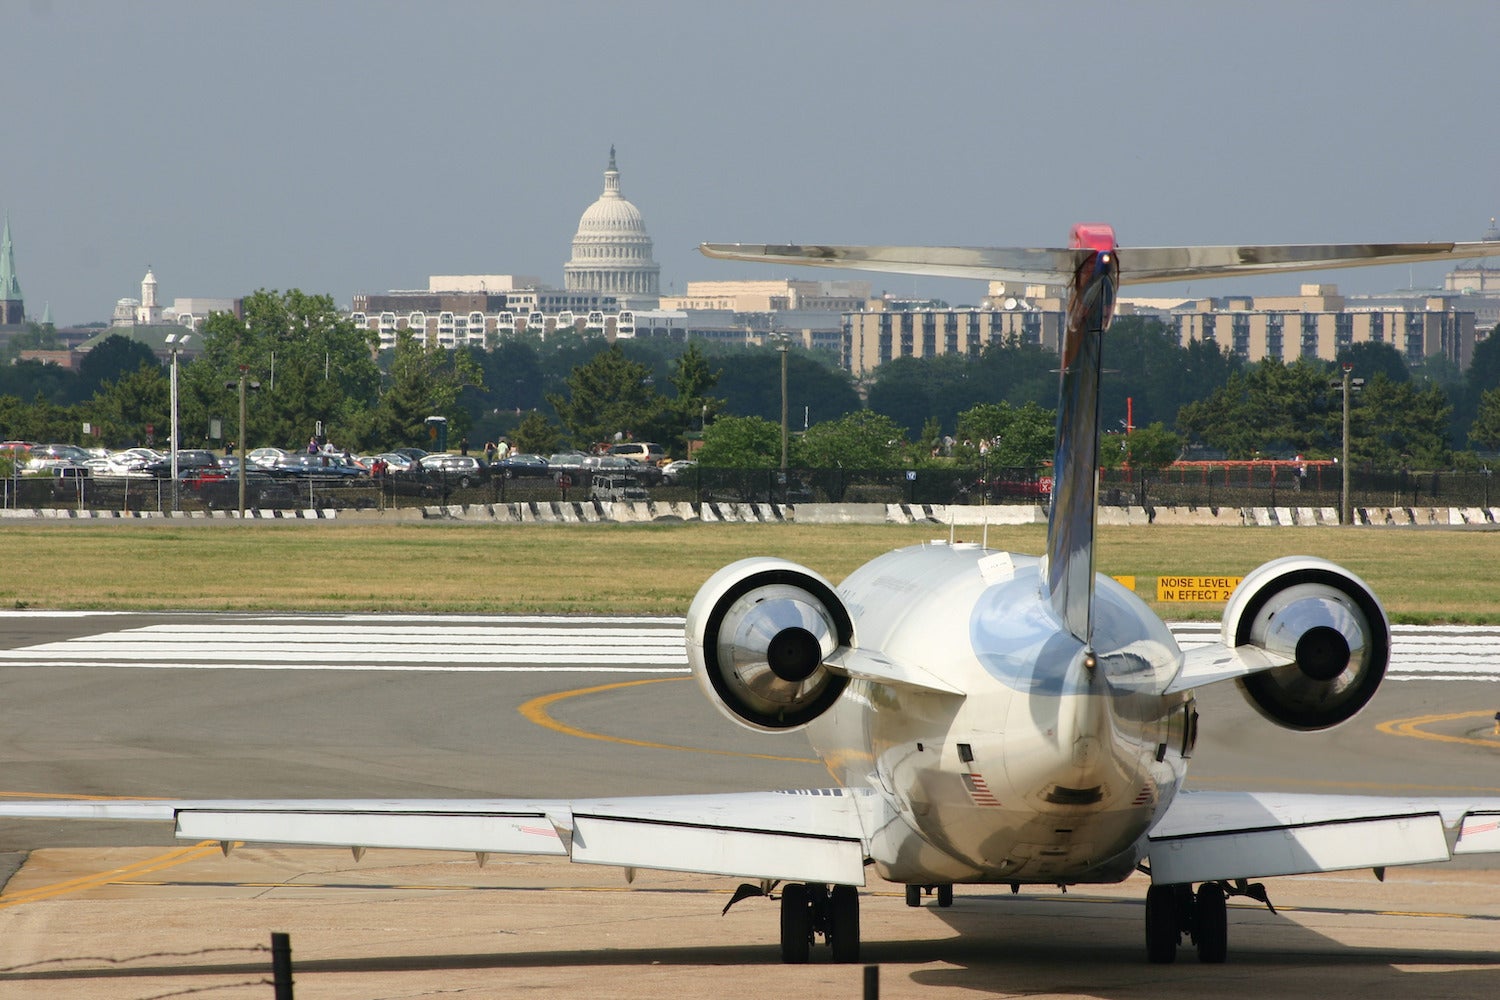 Airplane at DCA airport with the US Capital in the background